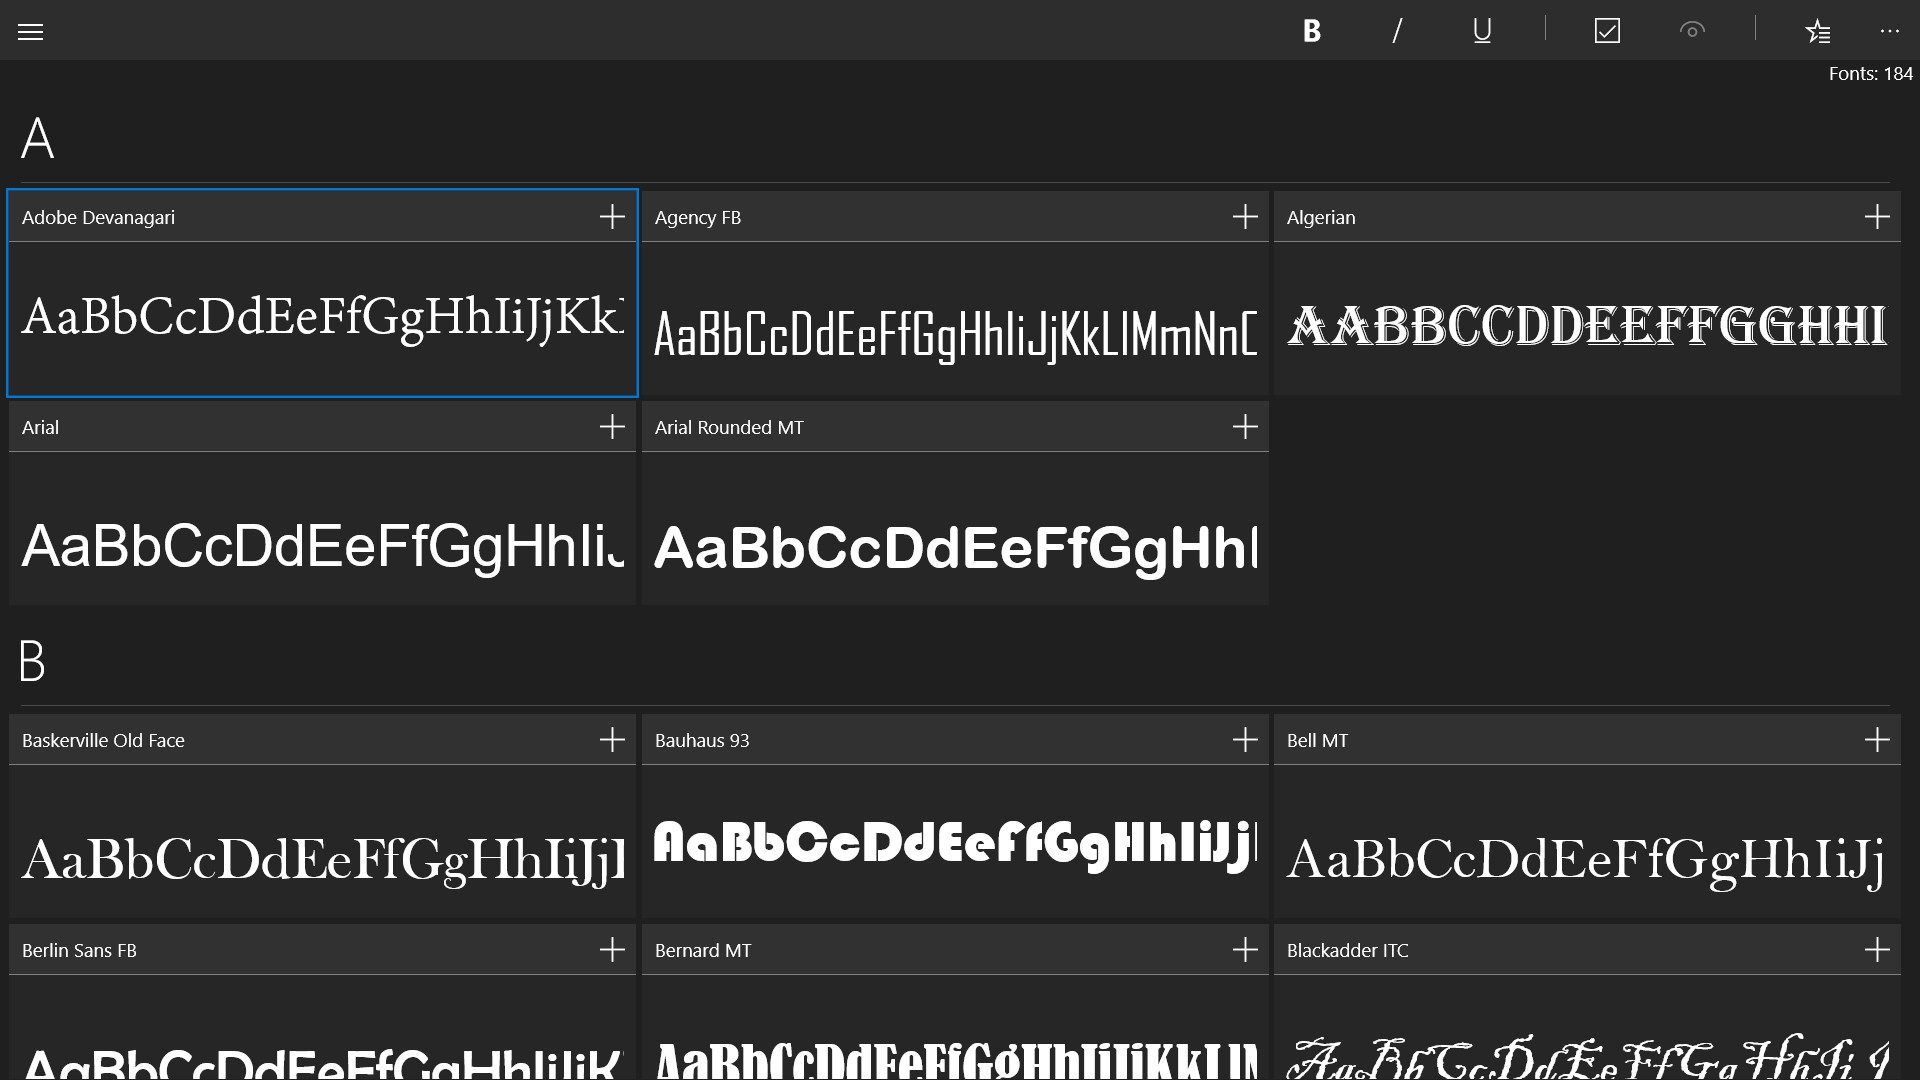 All fonts are grouped in alphabetical order, and the number of installed fonts is displayed in the upper right-hand corner.